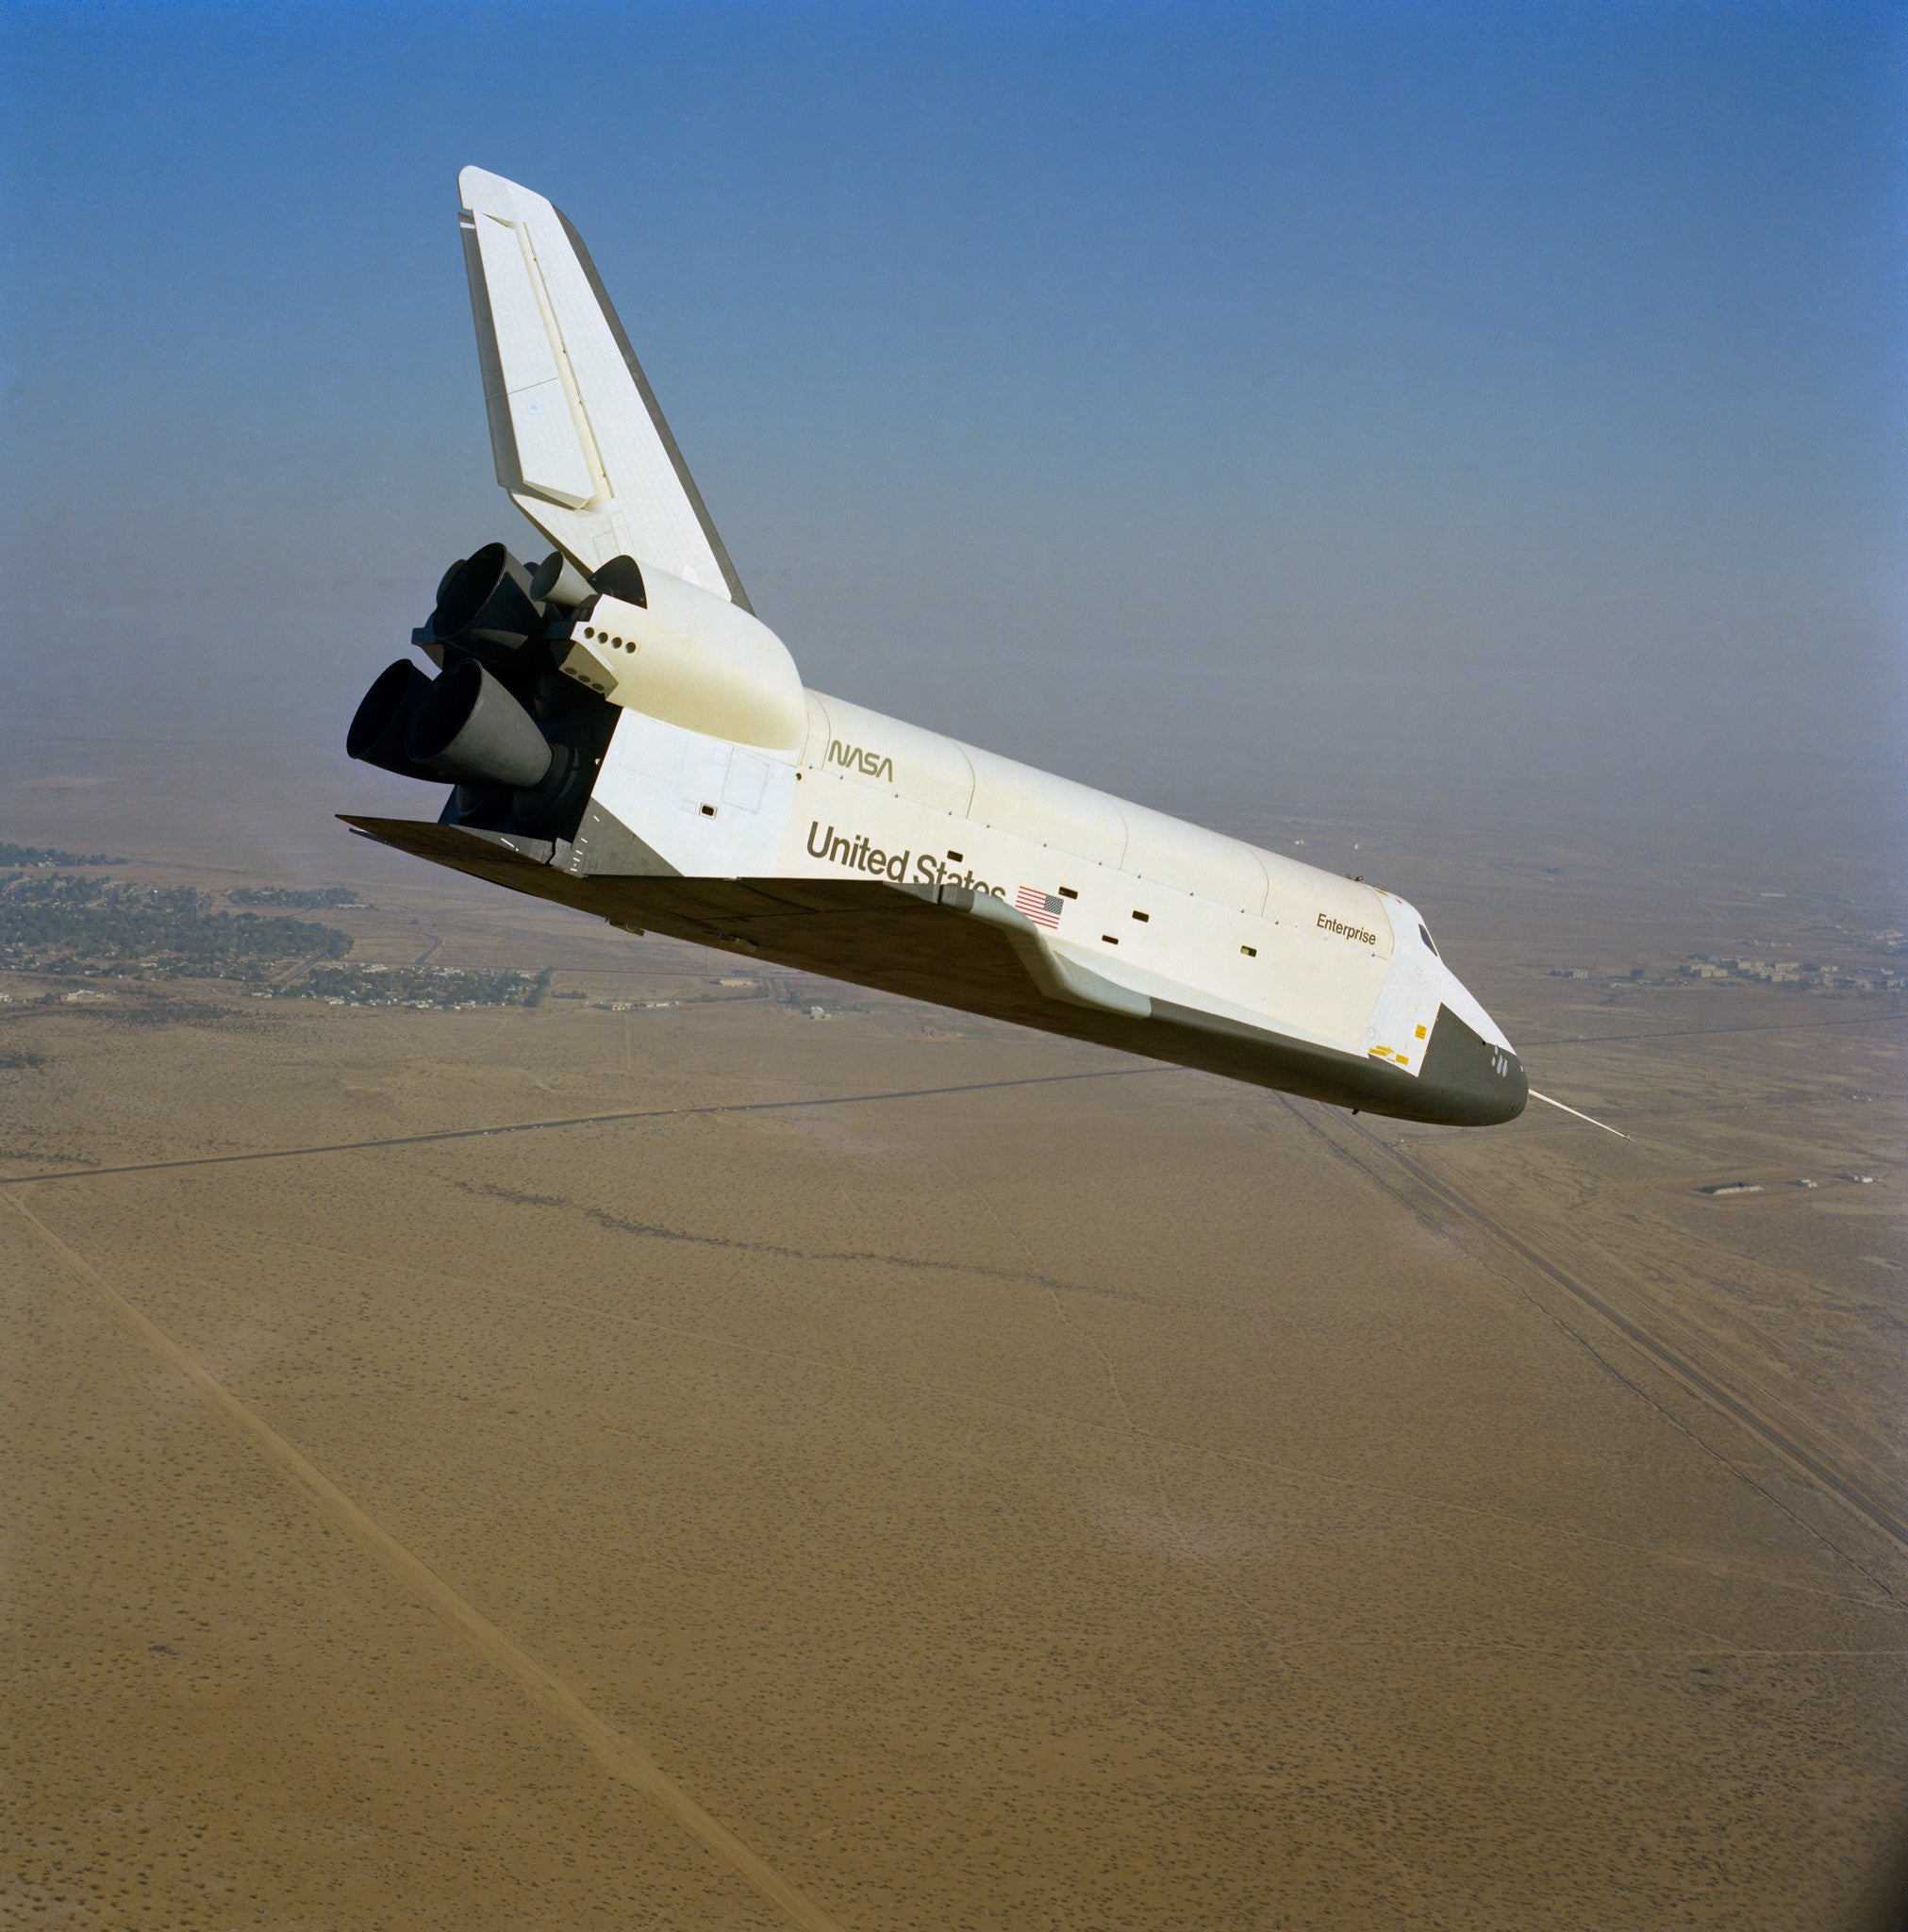 Remembering Enterprise: The Test Shuttle That Never Flew to Space